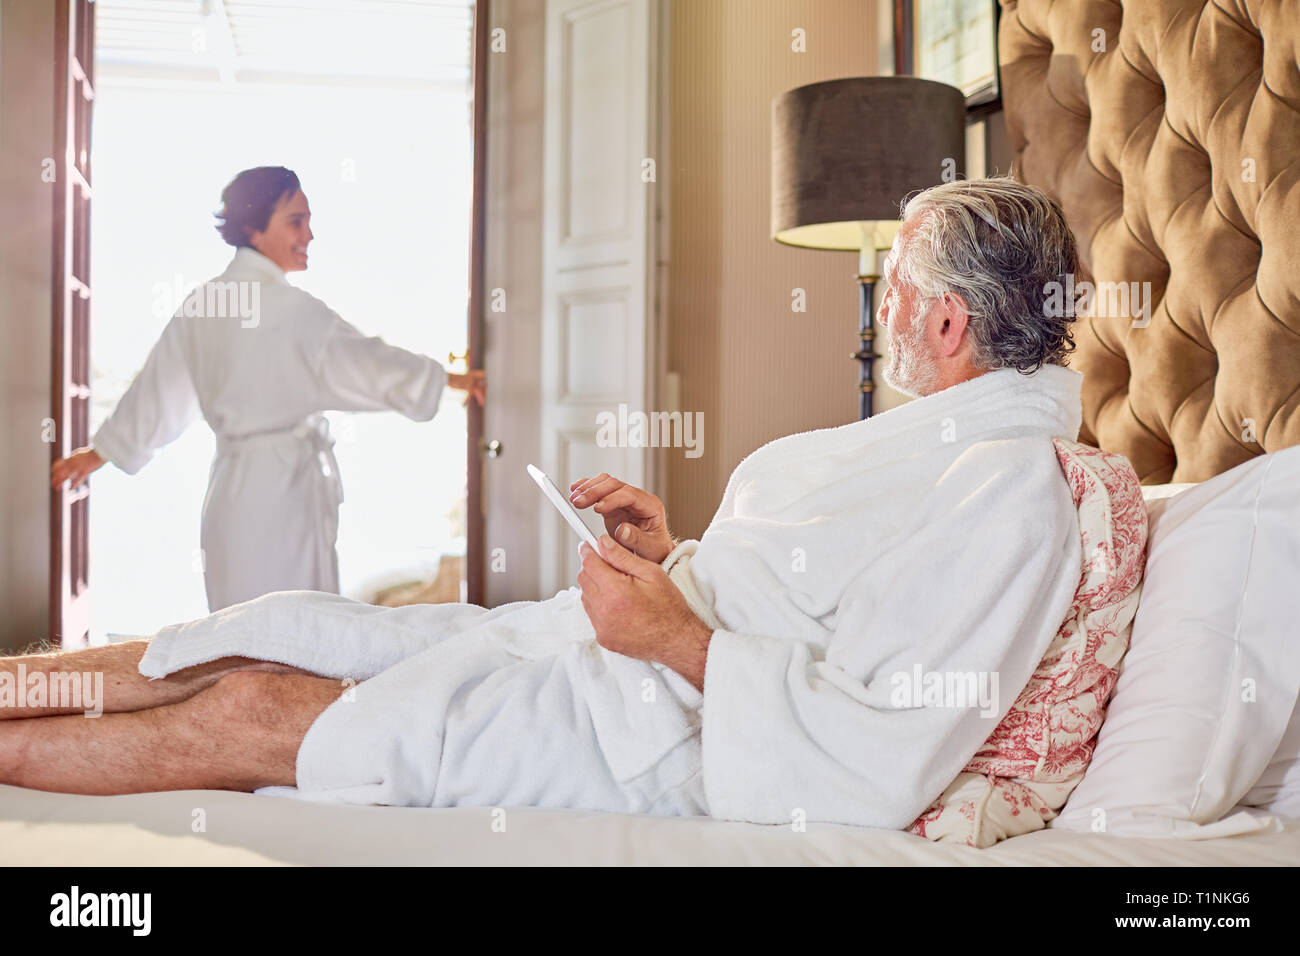 Mature couple in bathrobes relaxing in hotel room Stock Photo